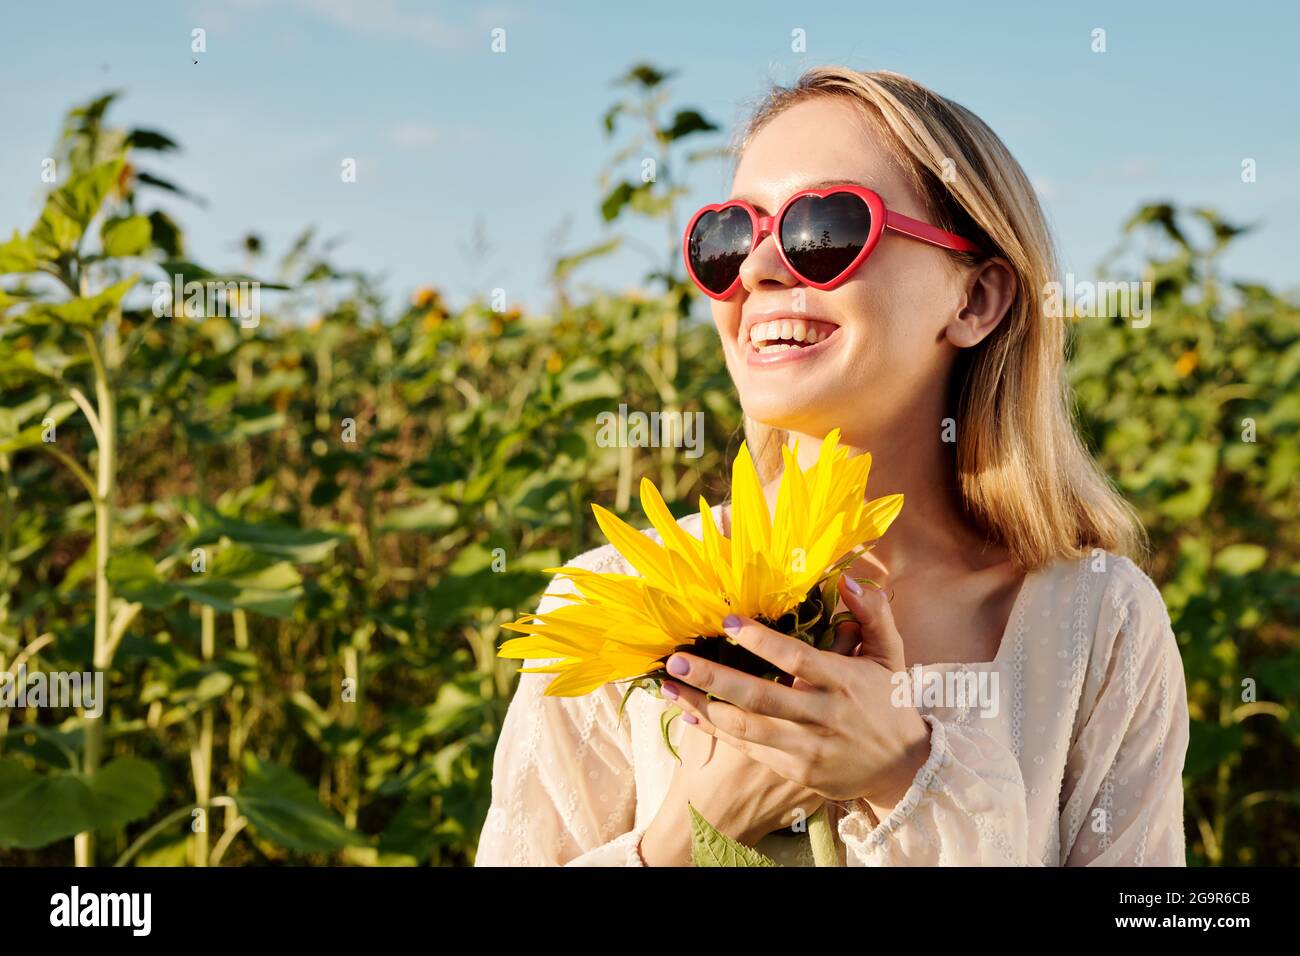 Laughing blond girl in sunglasses and white dress standing by one of sunflowers in front of camera against clear sky on sunny summer day Stock Photo